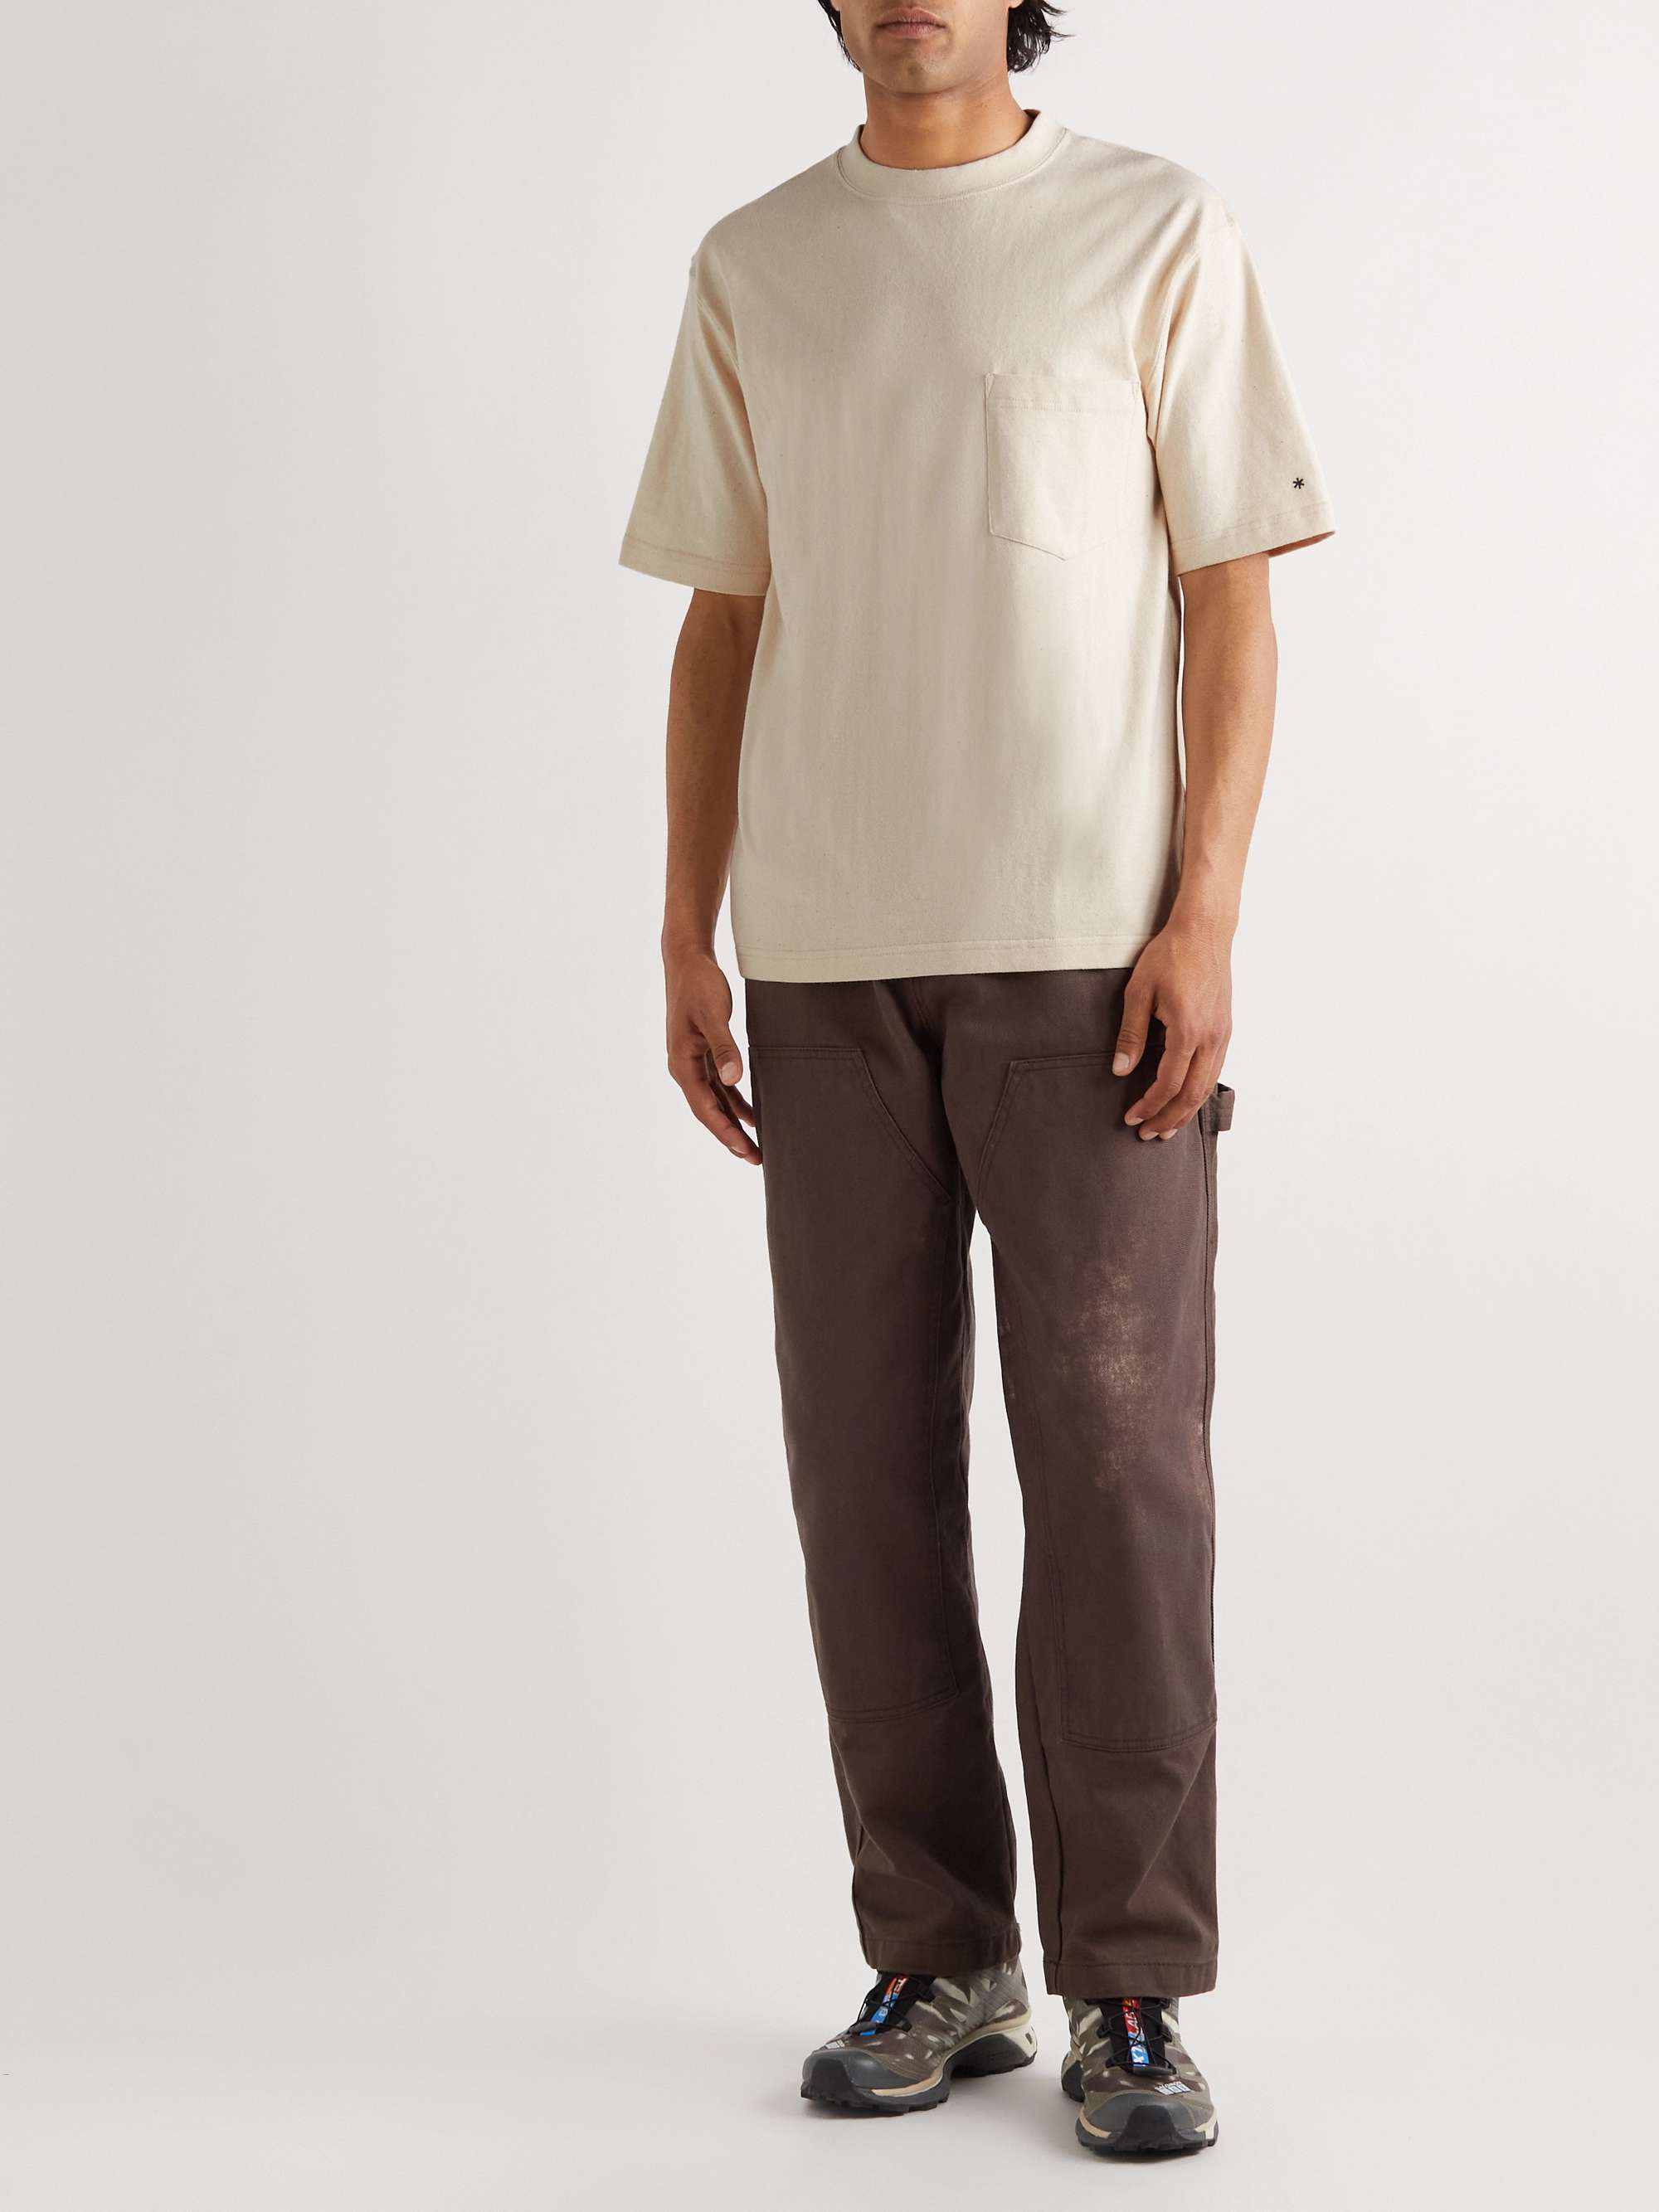 SNOW PEAK Recycled Cotton-Jersey T-Shirt for Men | MR PORTER